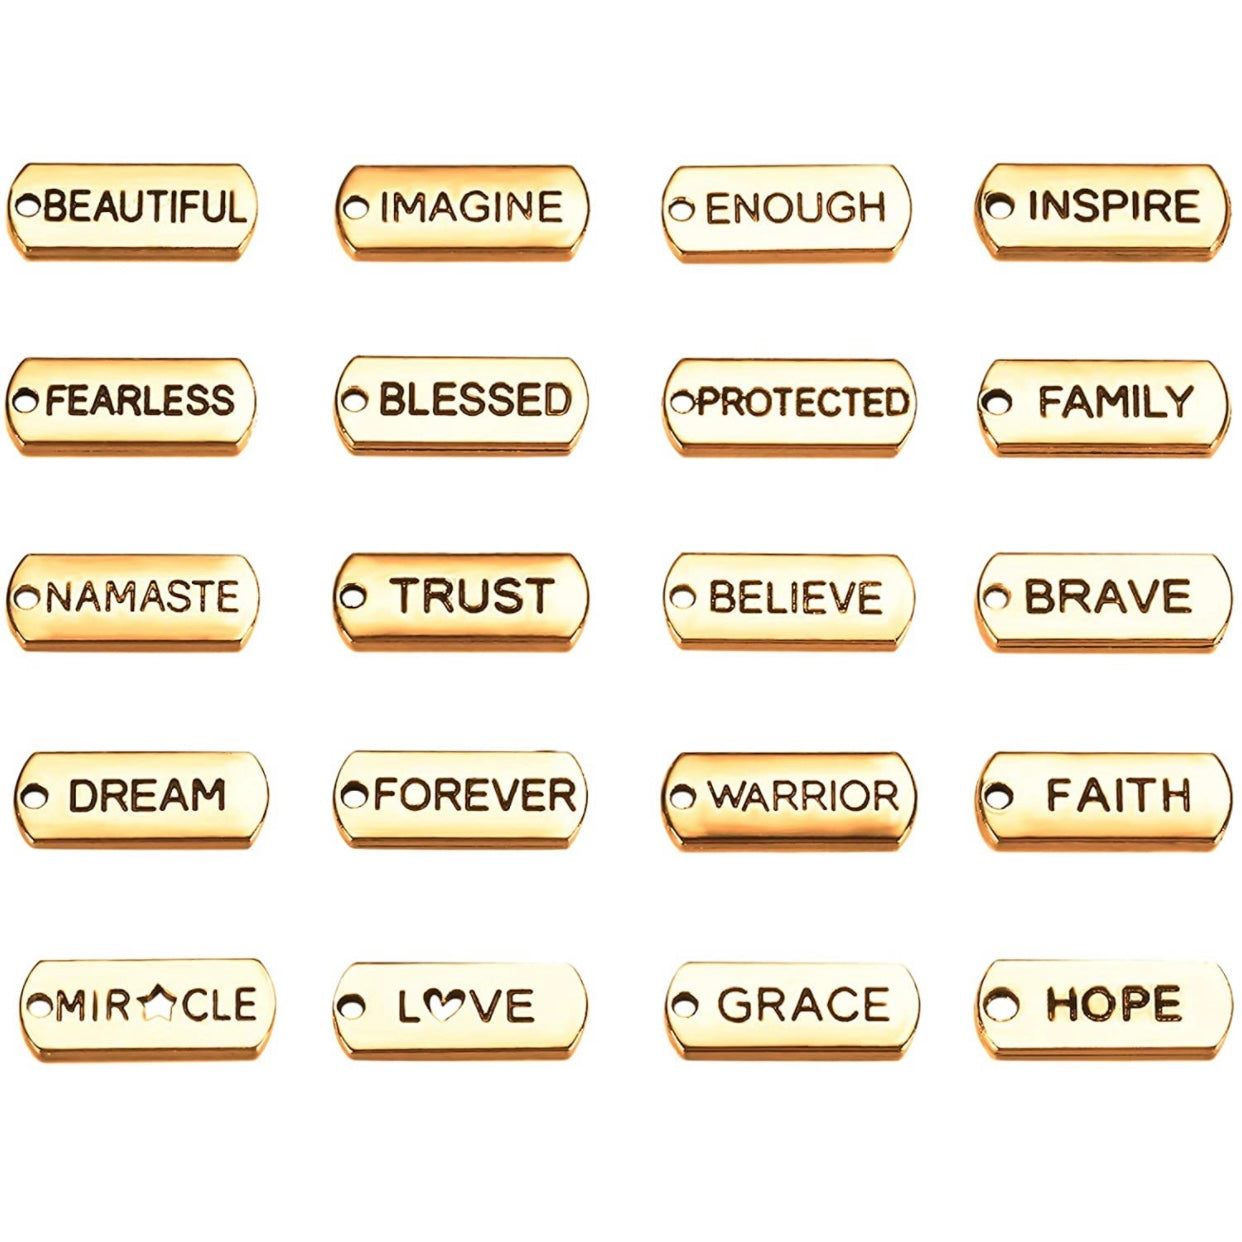 Gold affirmation charms, beautiful, fearless, namaste, dream, miracle, imagine, blessed, trust, forever, love, enough, protected, believe, warrior, grace, inspire, family, brave, faith, and hope.